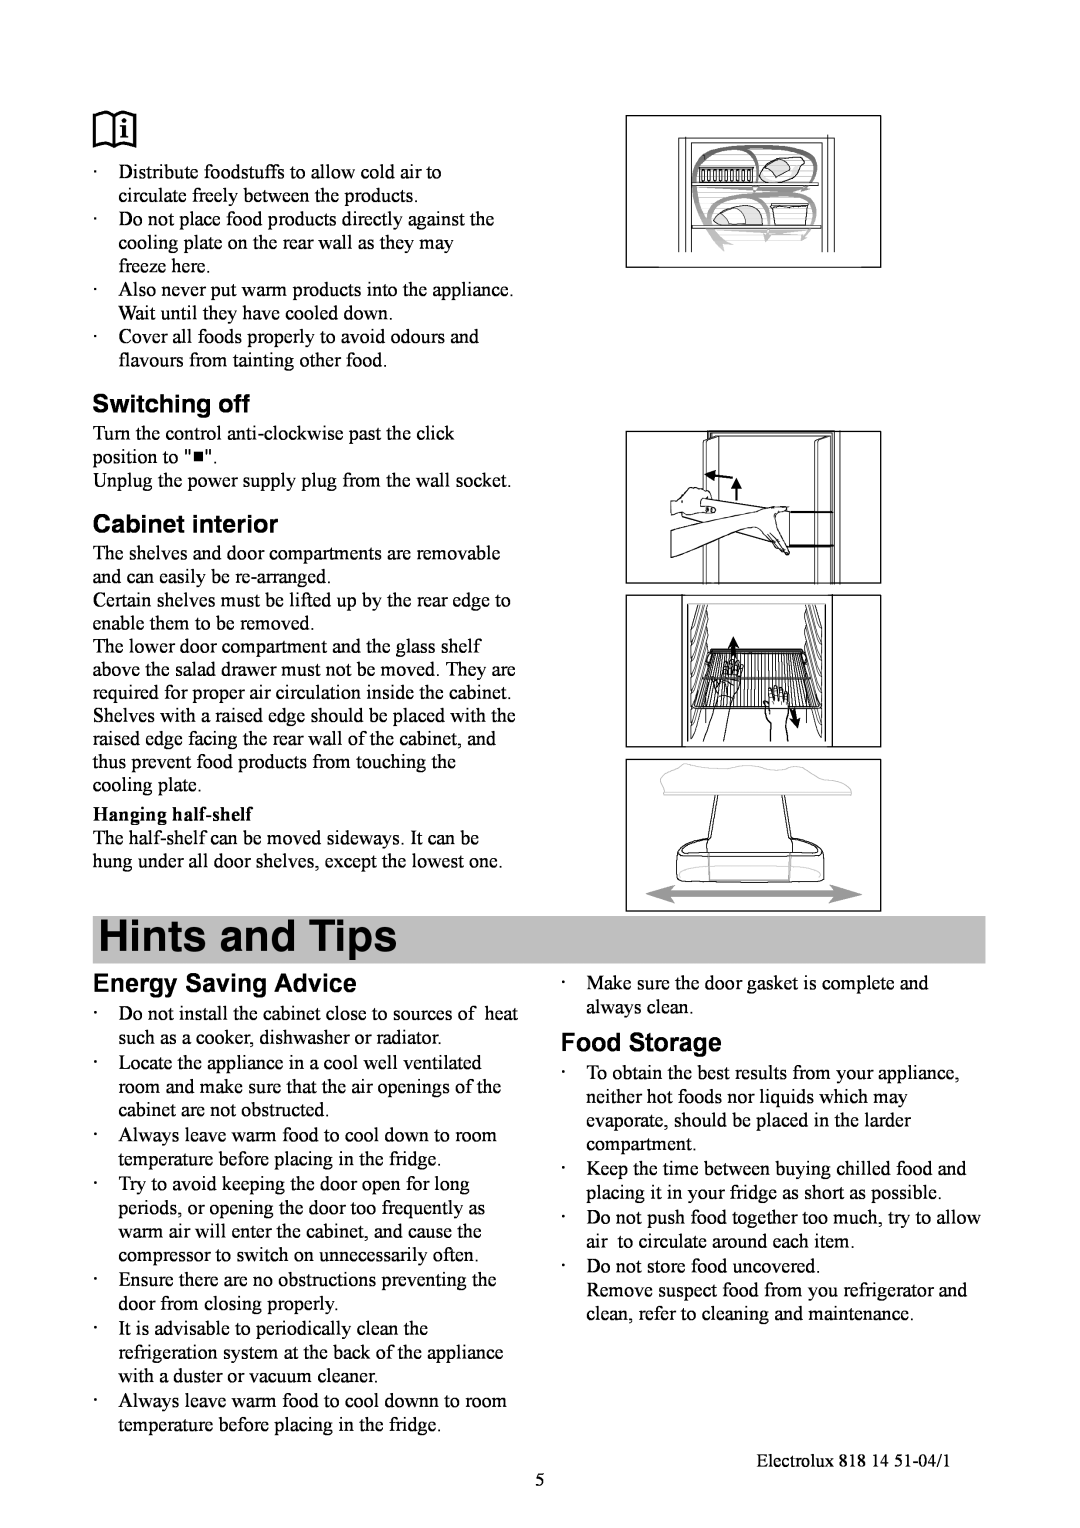 Electrolux ER8817C Hints and Tips, Switching off, Cabinet interior, Energy Saving Advice, Food Storage, Hanging half-shelf 